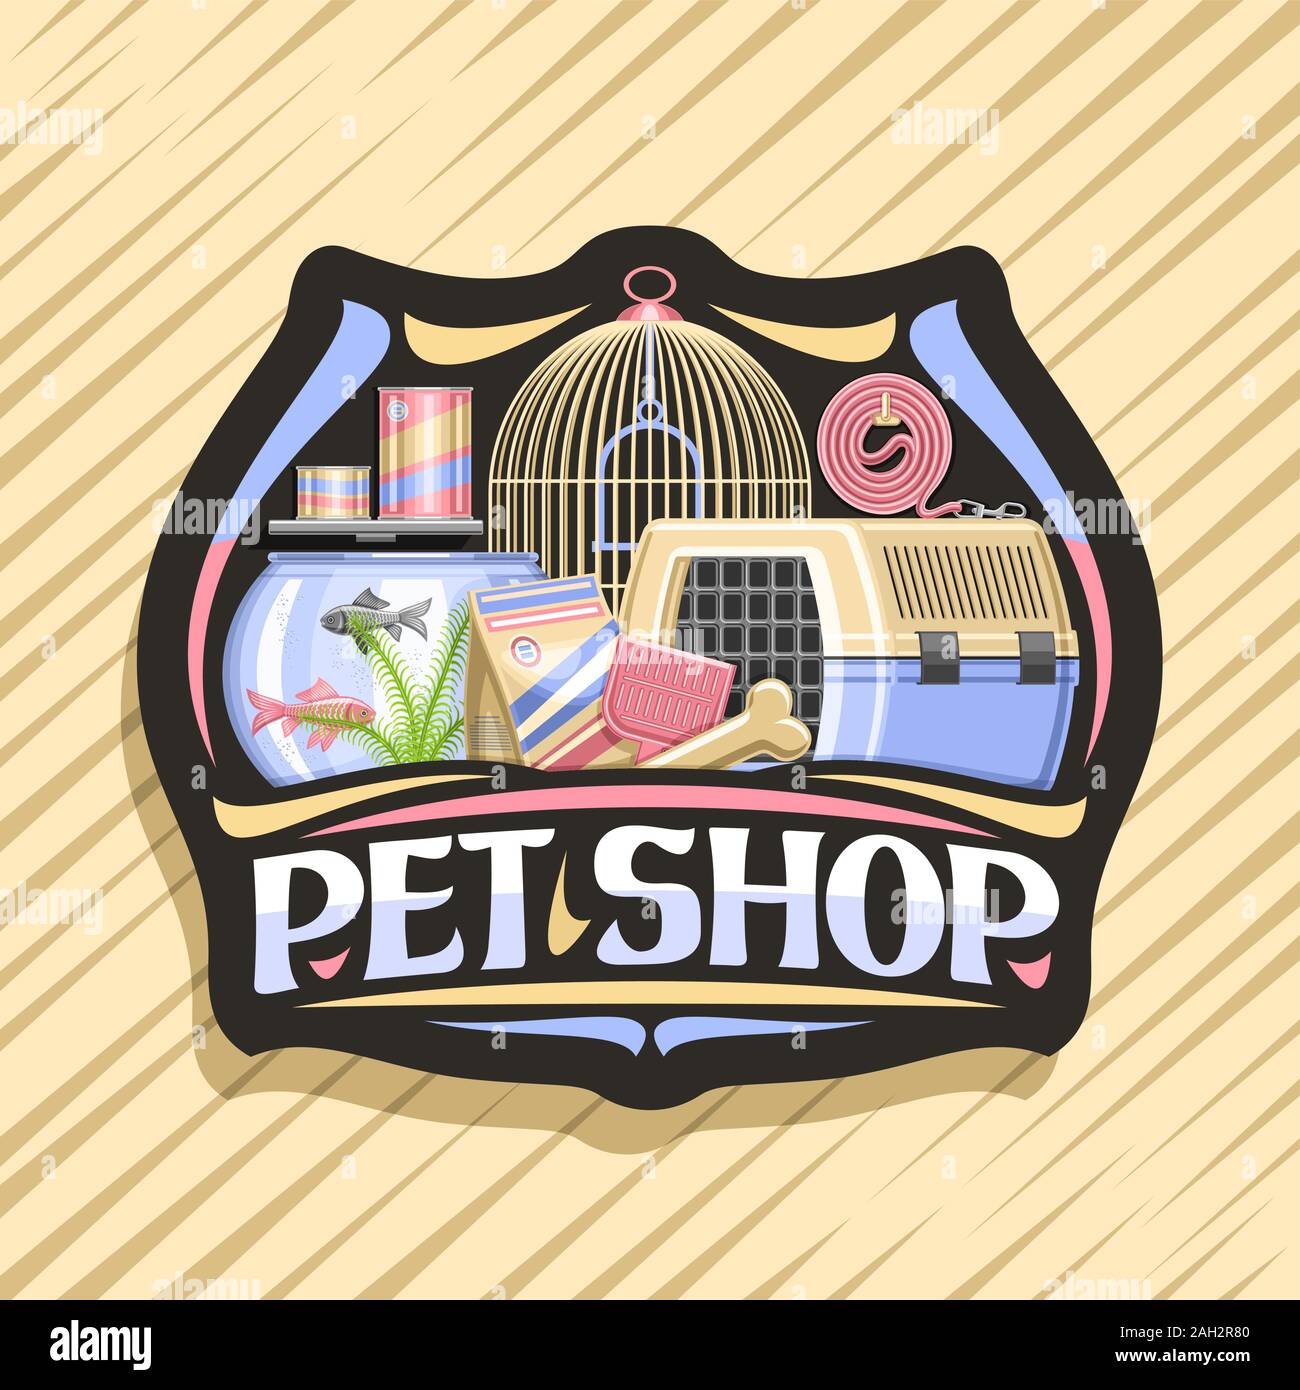 Vector logo for Pet Shop, black decorative badge with illustration of transport box for cat, plastic scoop, aquarium with goldfish in water and curled Stock Vector